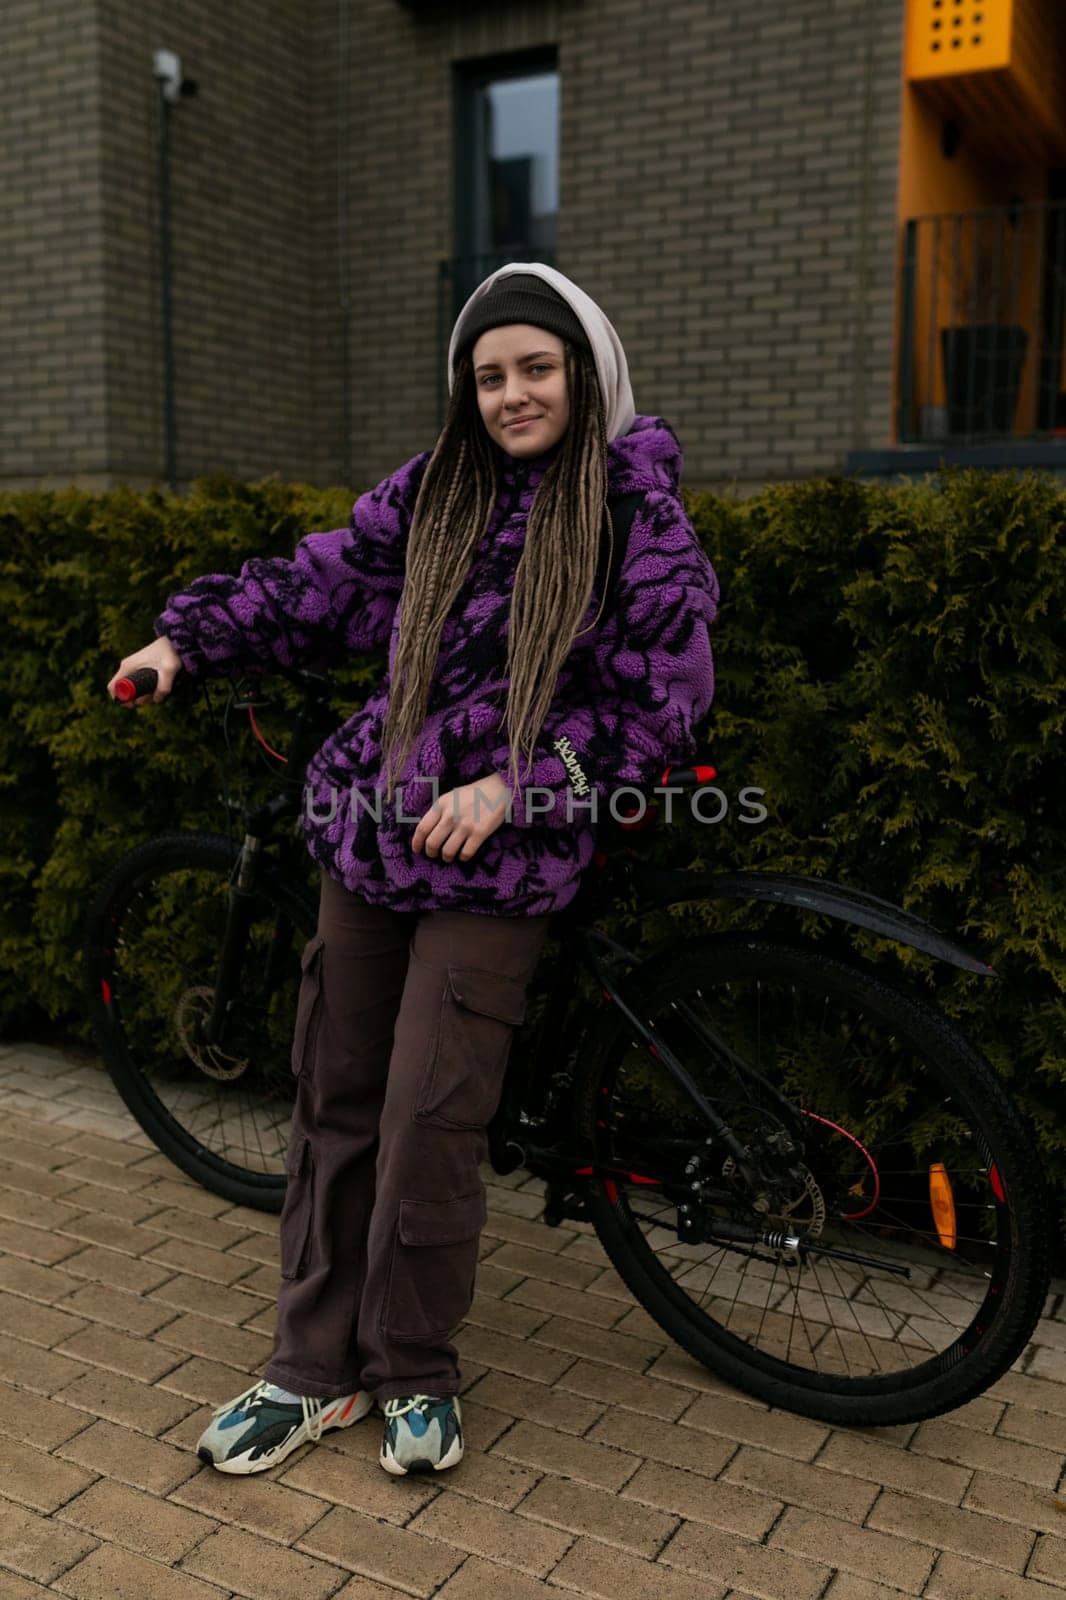 Bicycle rental concept. Young woman riding a sports bike around the city by TRMK